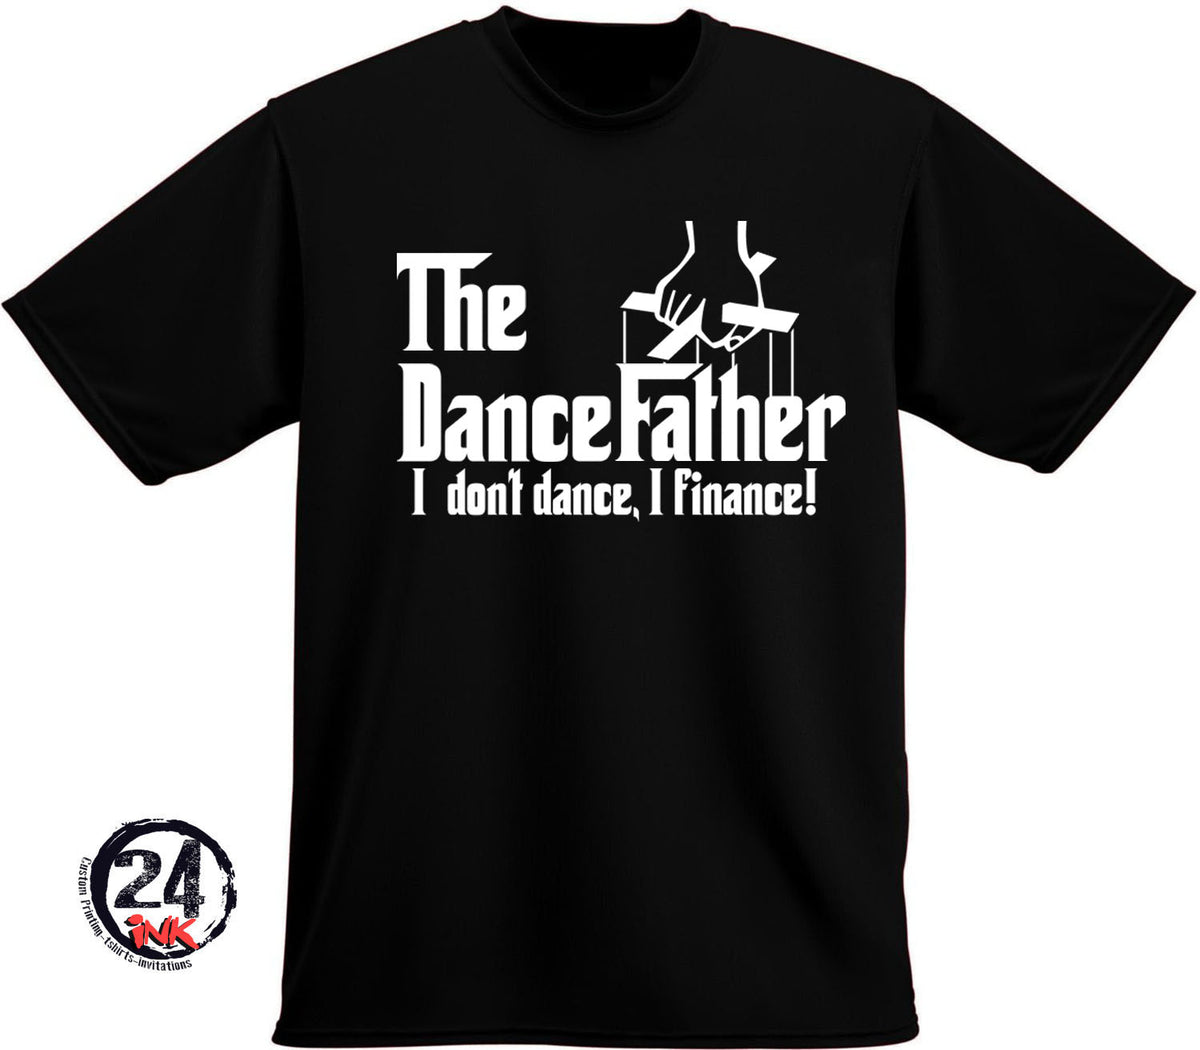 The Dance Father Shirt